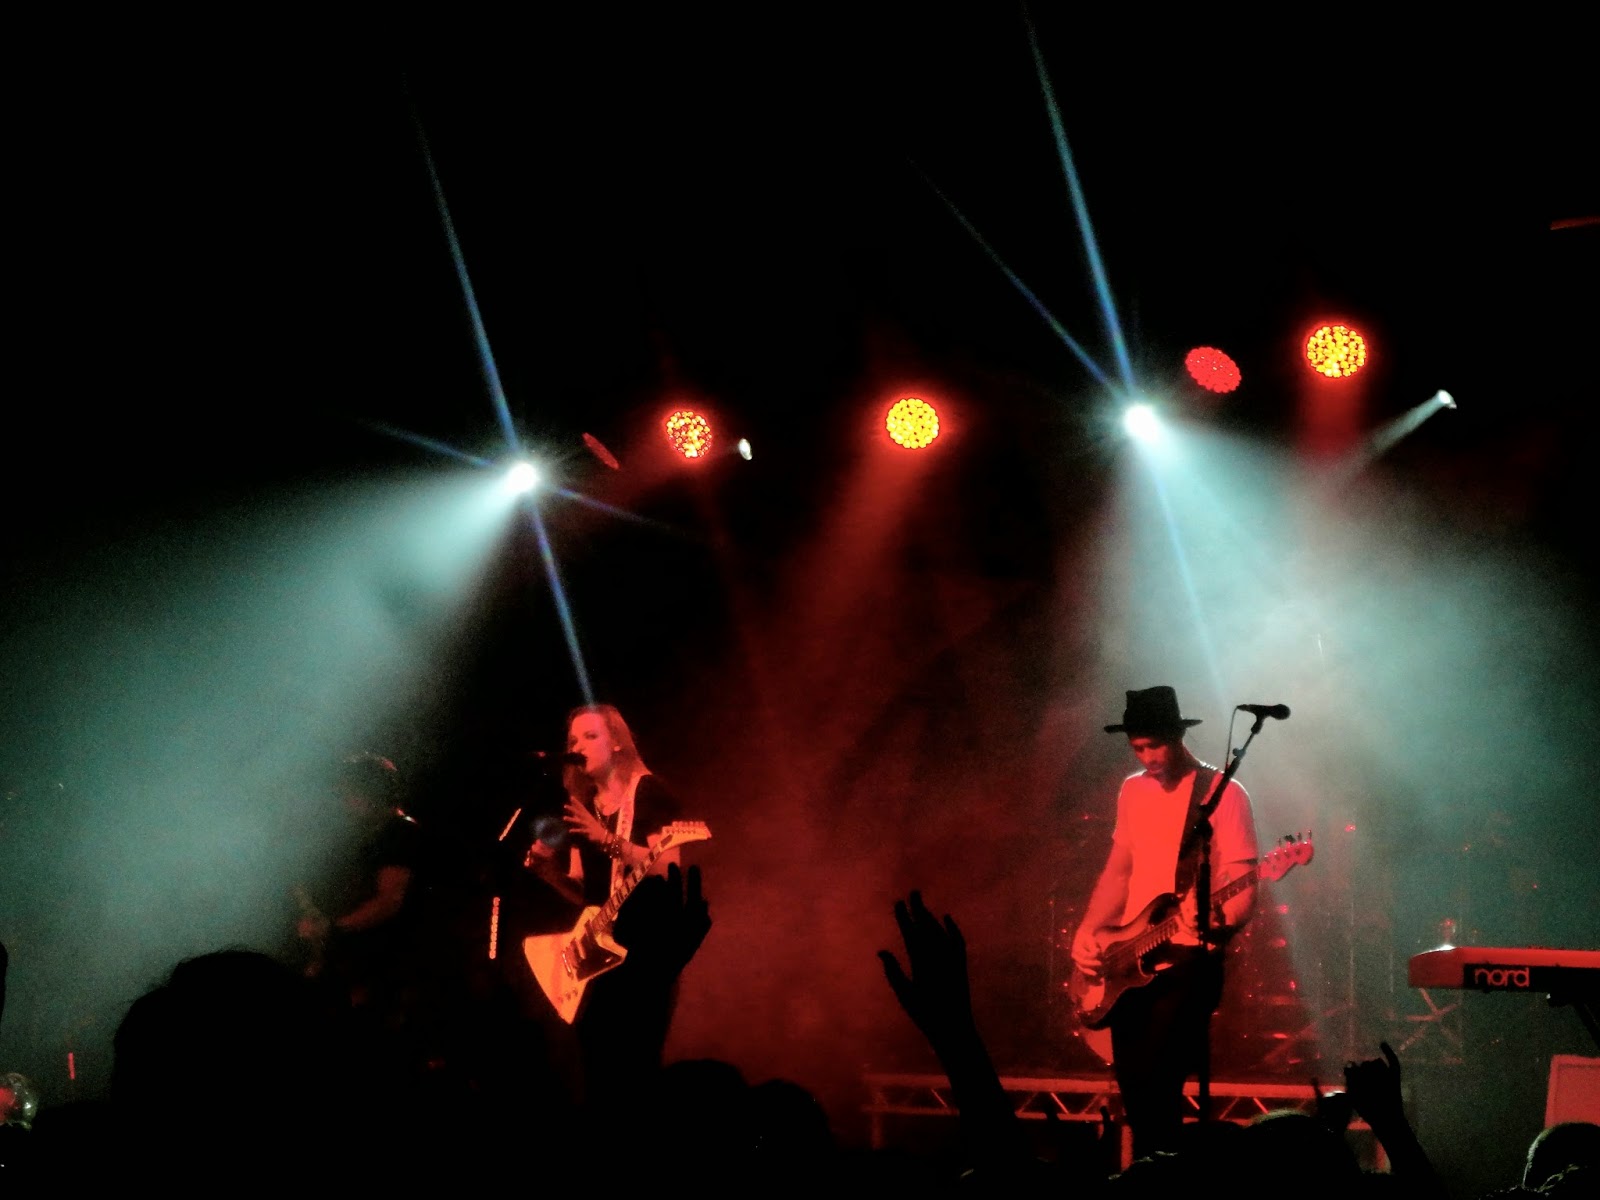 Halestorm performing live at the Glasgow Barrowlands